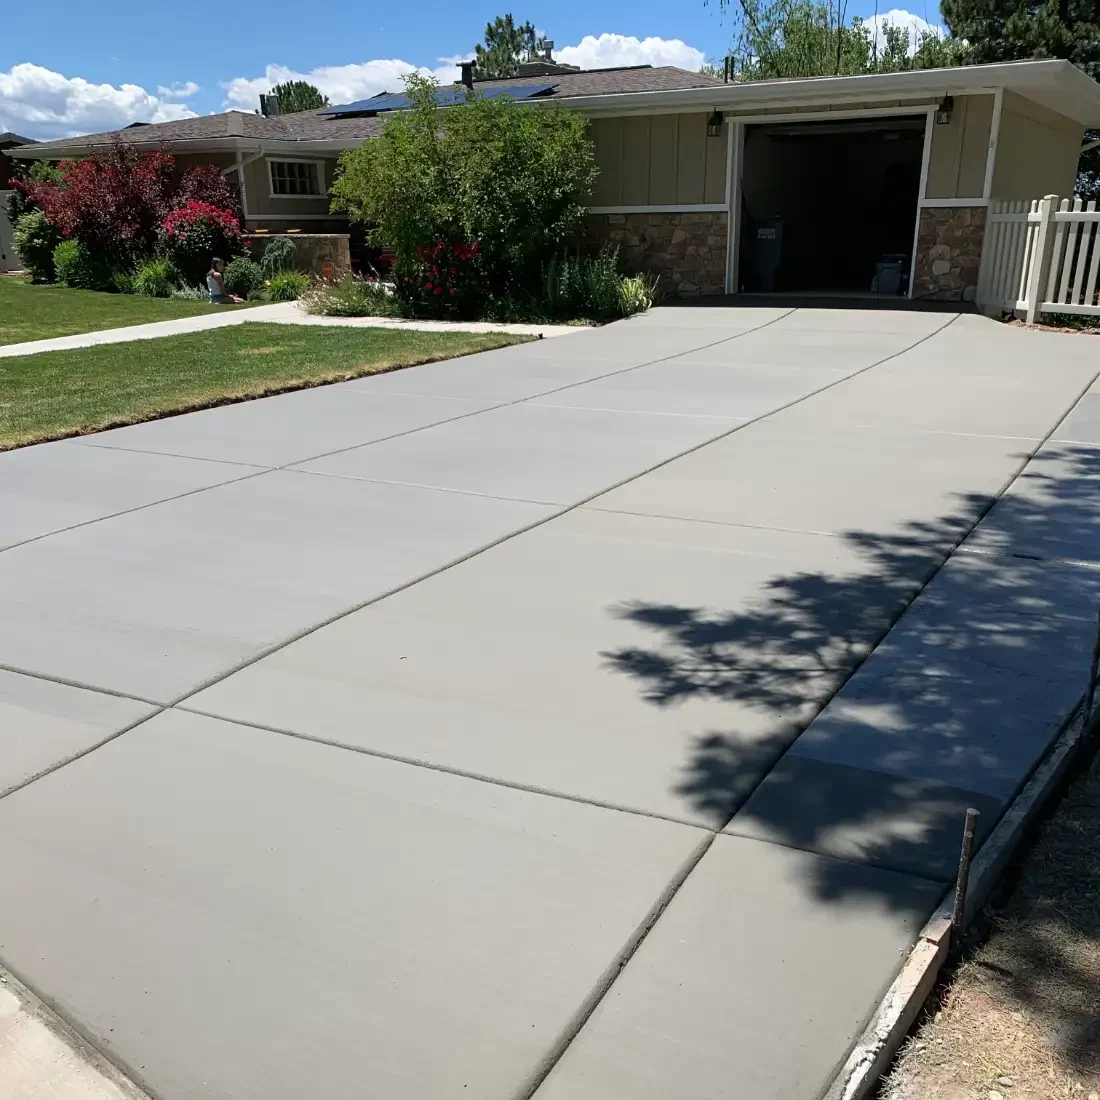 bountiful-utah-concrete-grading-driveway-contractor-after_1100sq